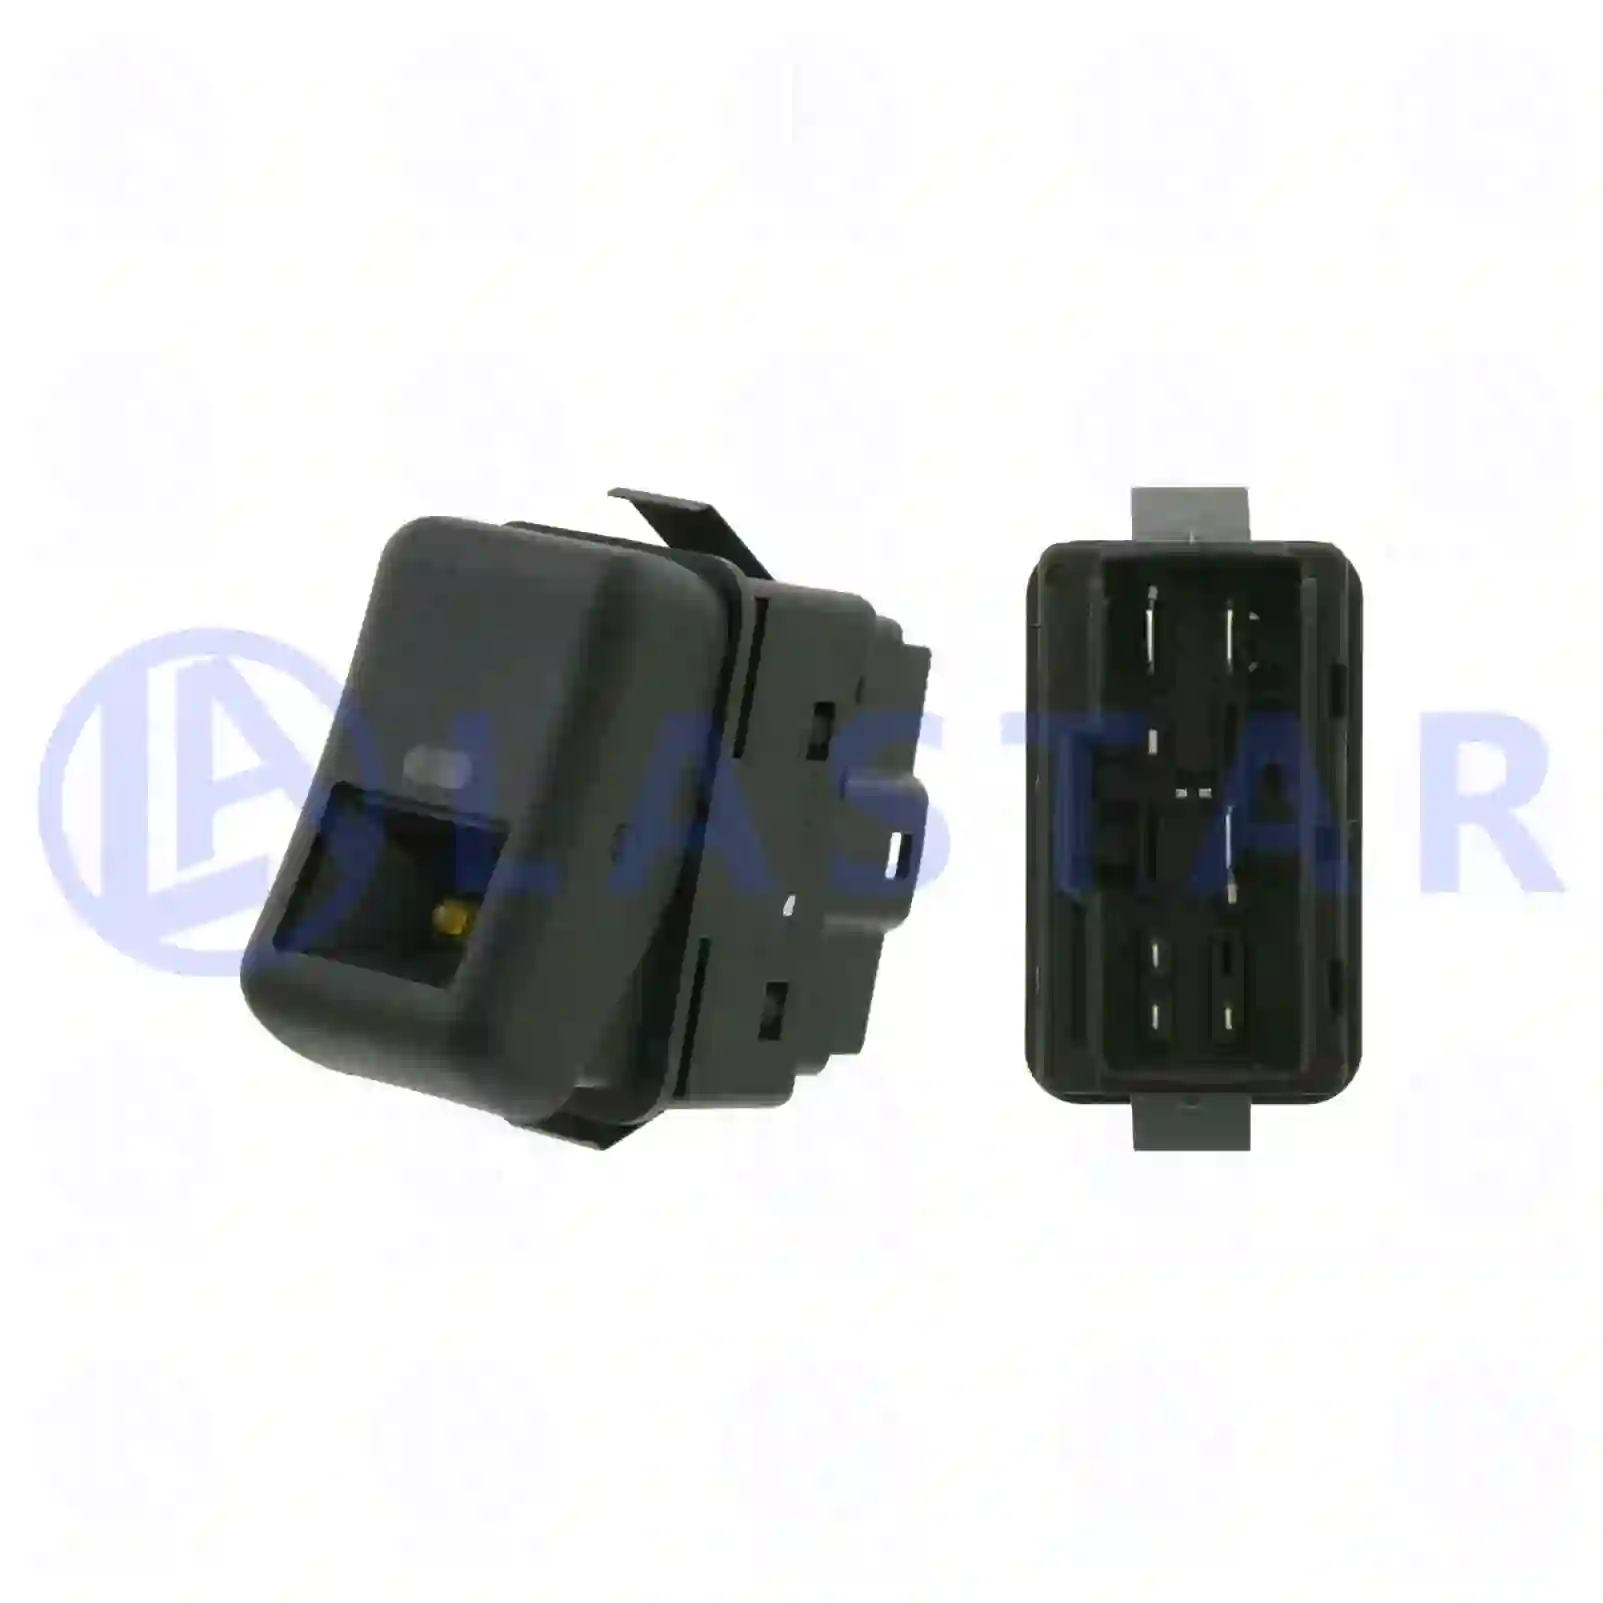 Switch, 77711186, 1624111, 20569981, 8157751, ZG20167-0008 ||  77711186 Lastar Spare Part | Truck Spare Parts, Auotomotive Spare Parts Switch, 77711186, 1624111, 20569981, 8157751, ZG20167-0008 ||  77711186 Lastar Spare Part | Truck Spare Parts, Auotomotive Spare Parts